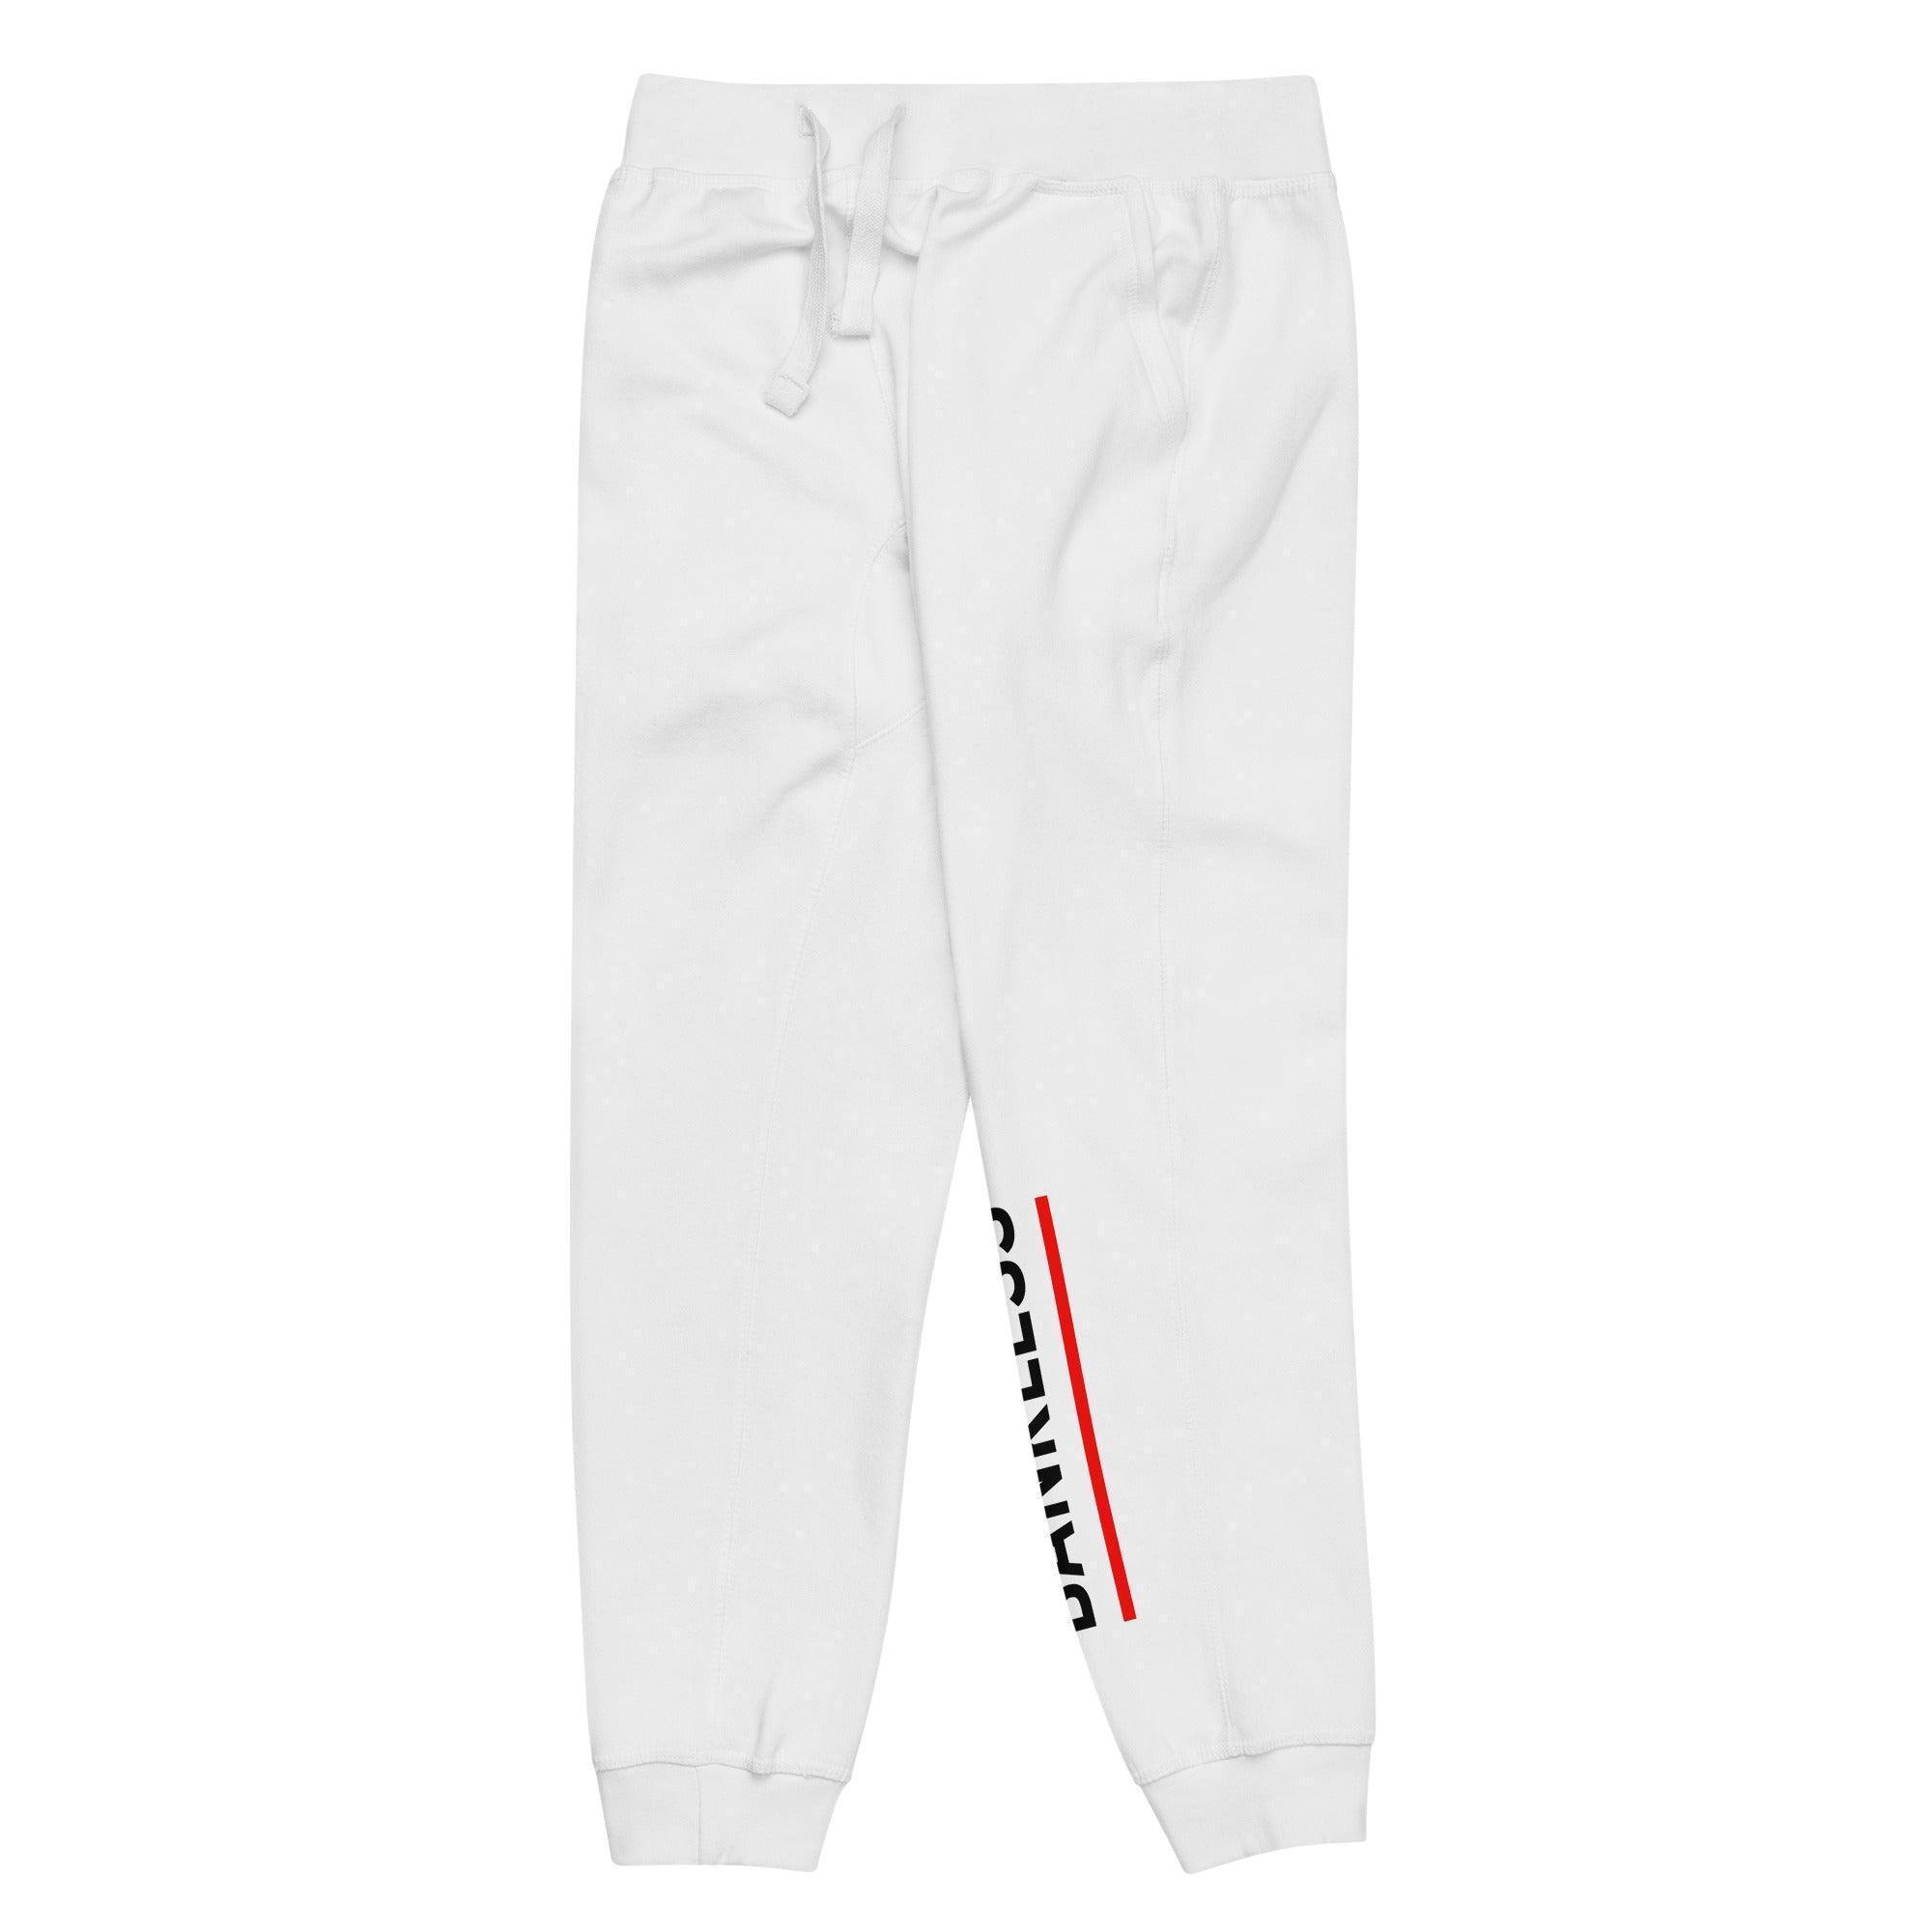 Bankless Sweatpants - InvestmenTees